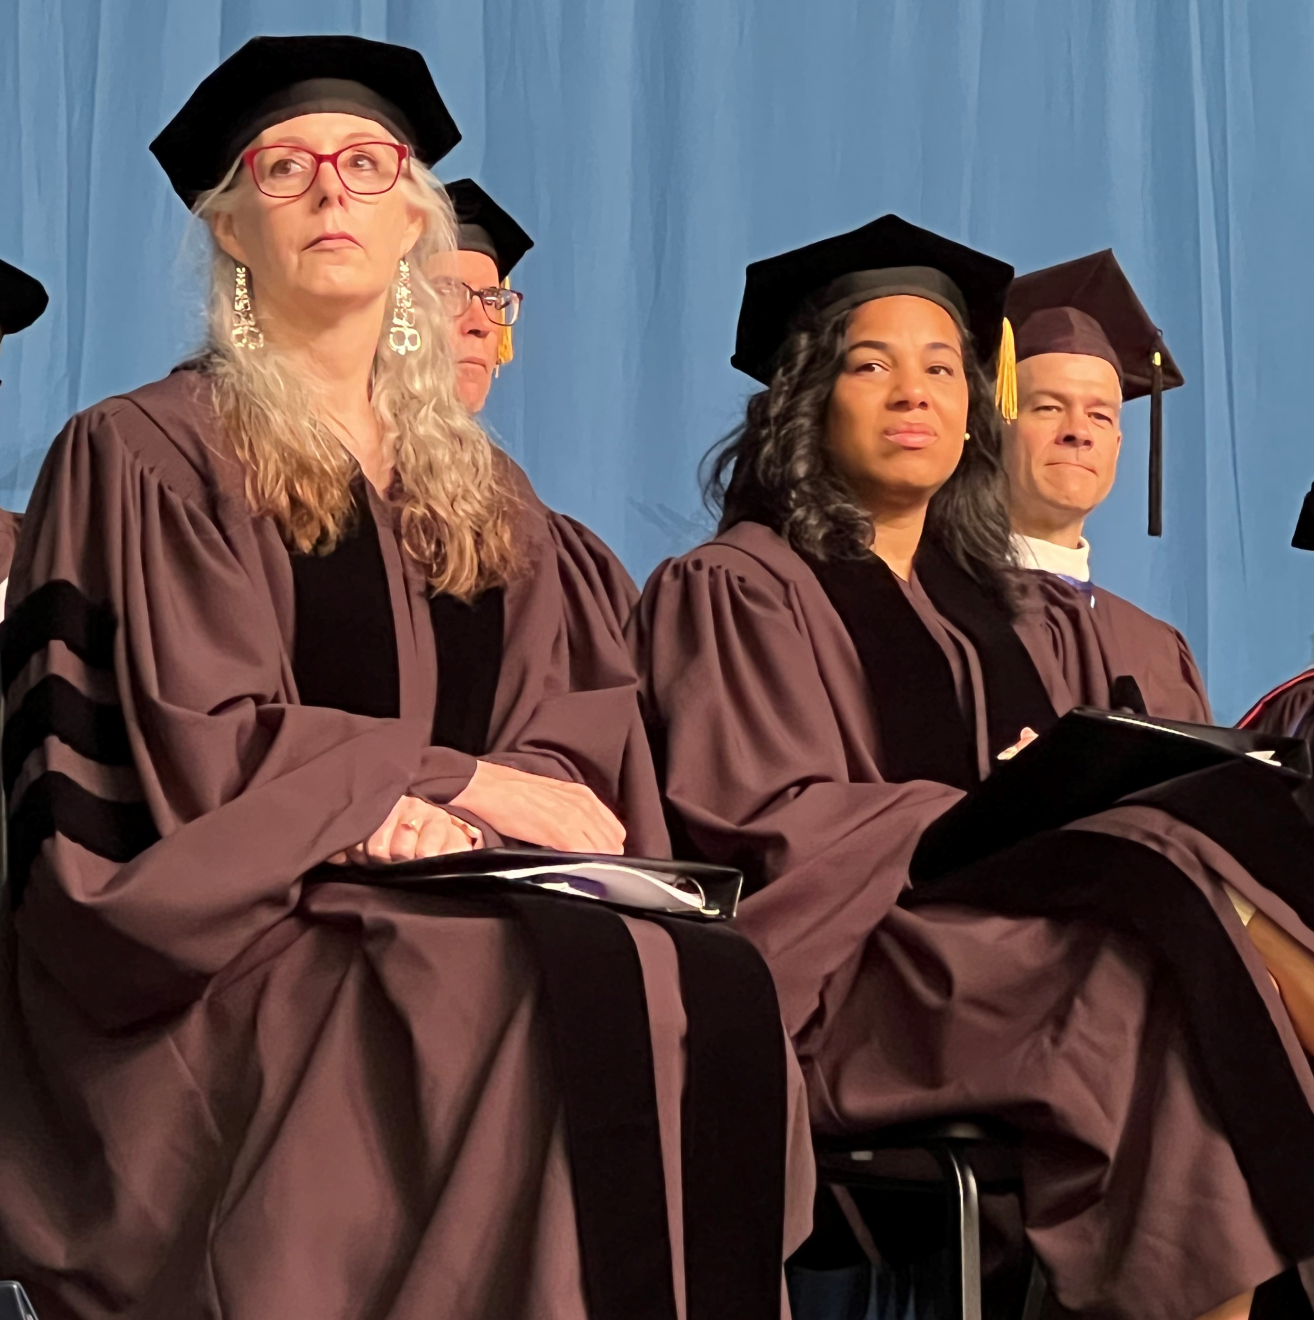 SUNY Honorary Degree recipients Laurie Halse Anderson '81 (left) and Lanessa Owens-Chaplin '03 (right).